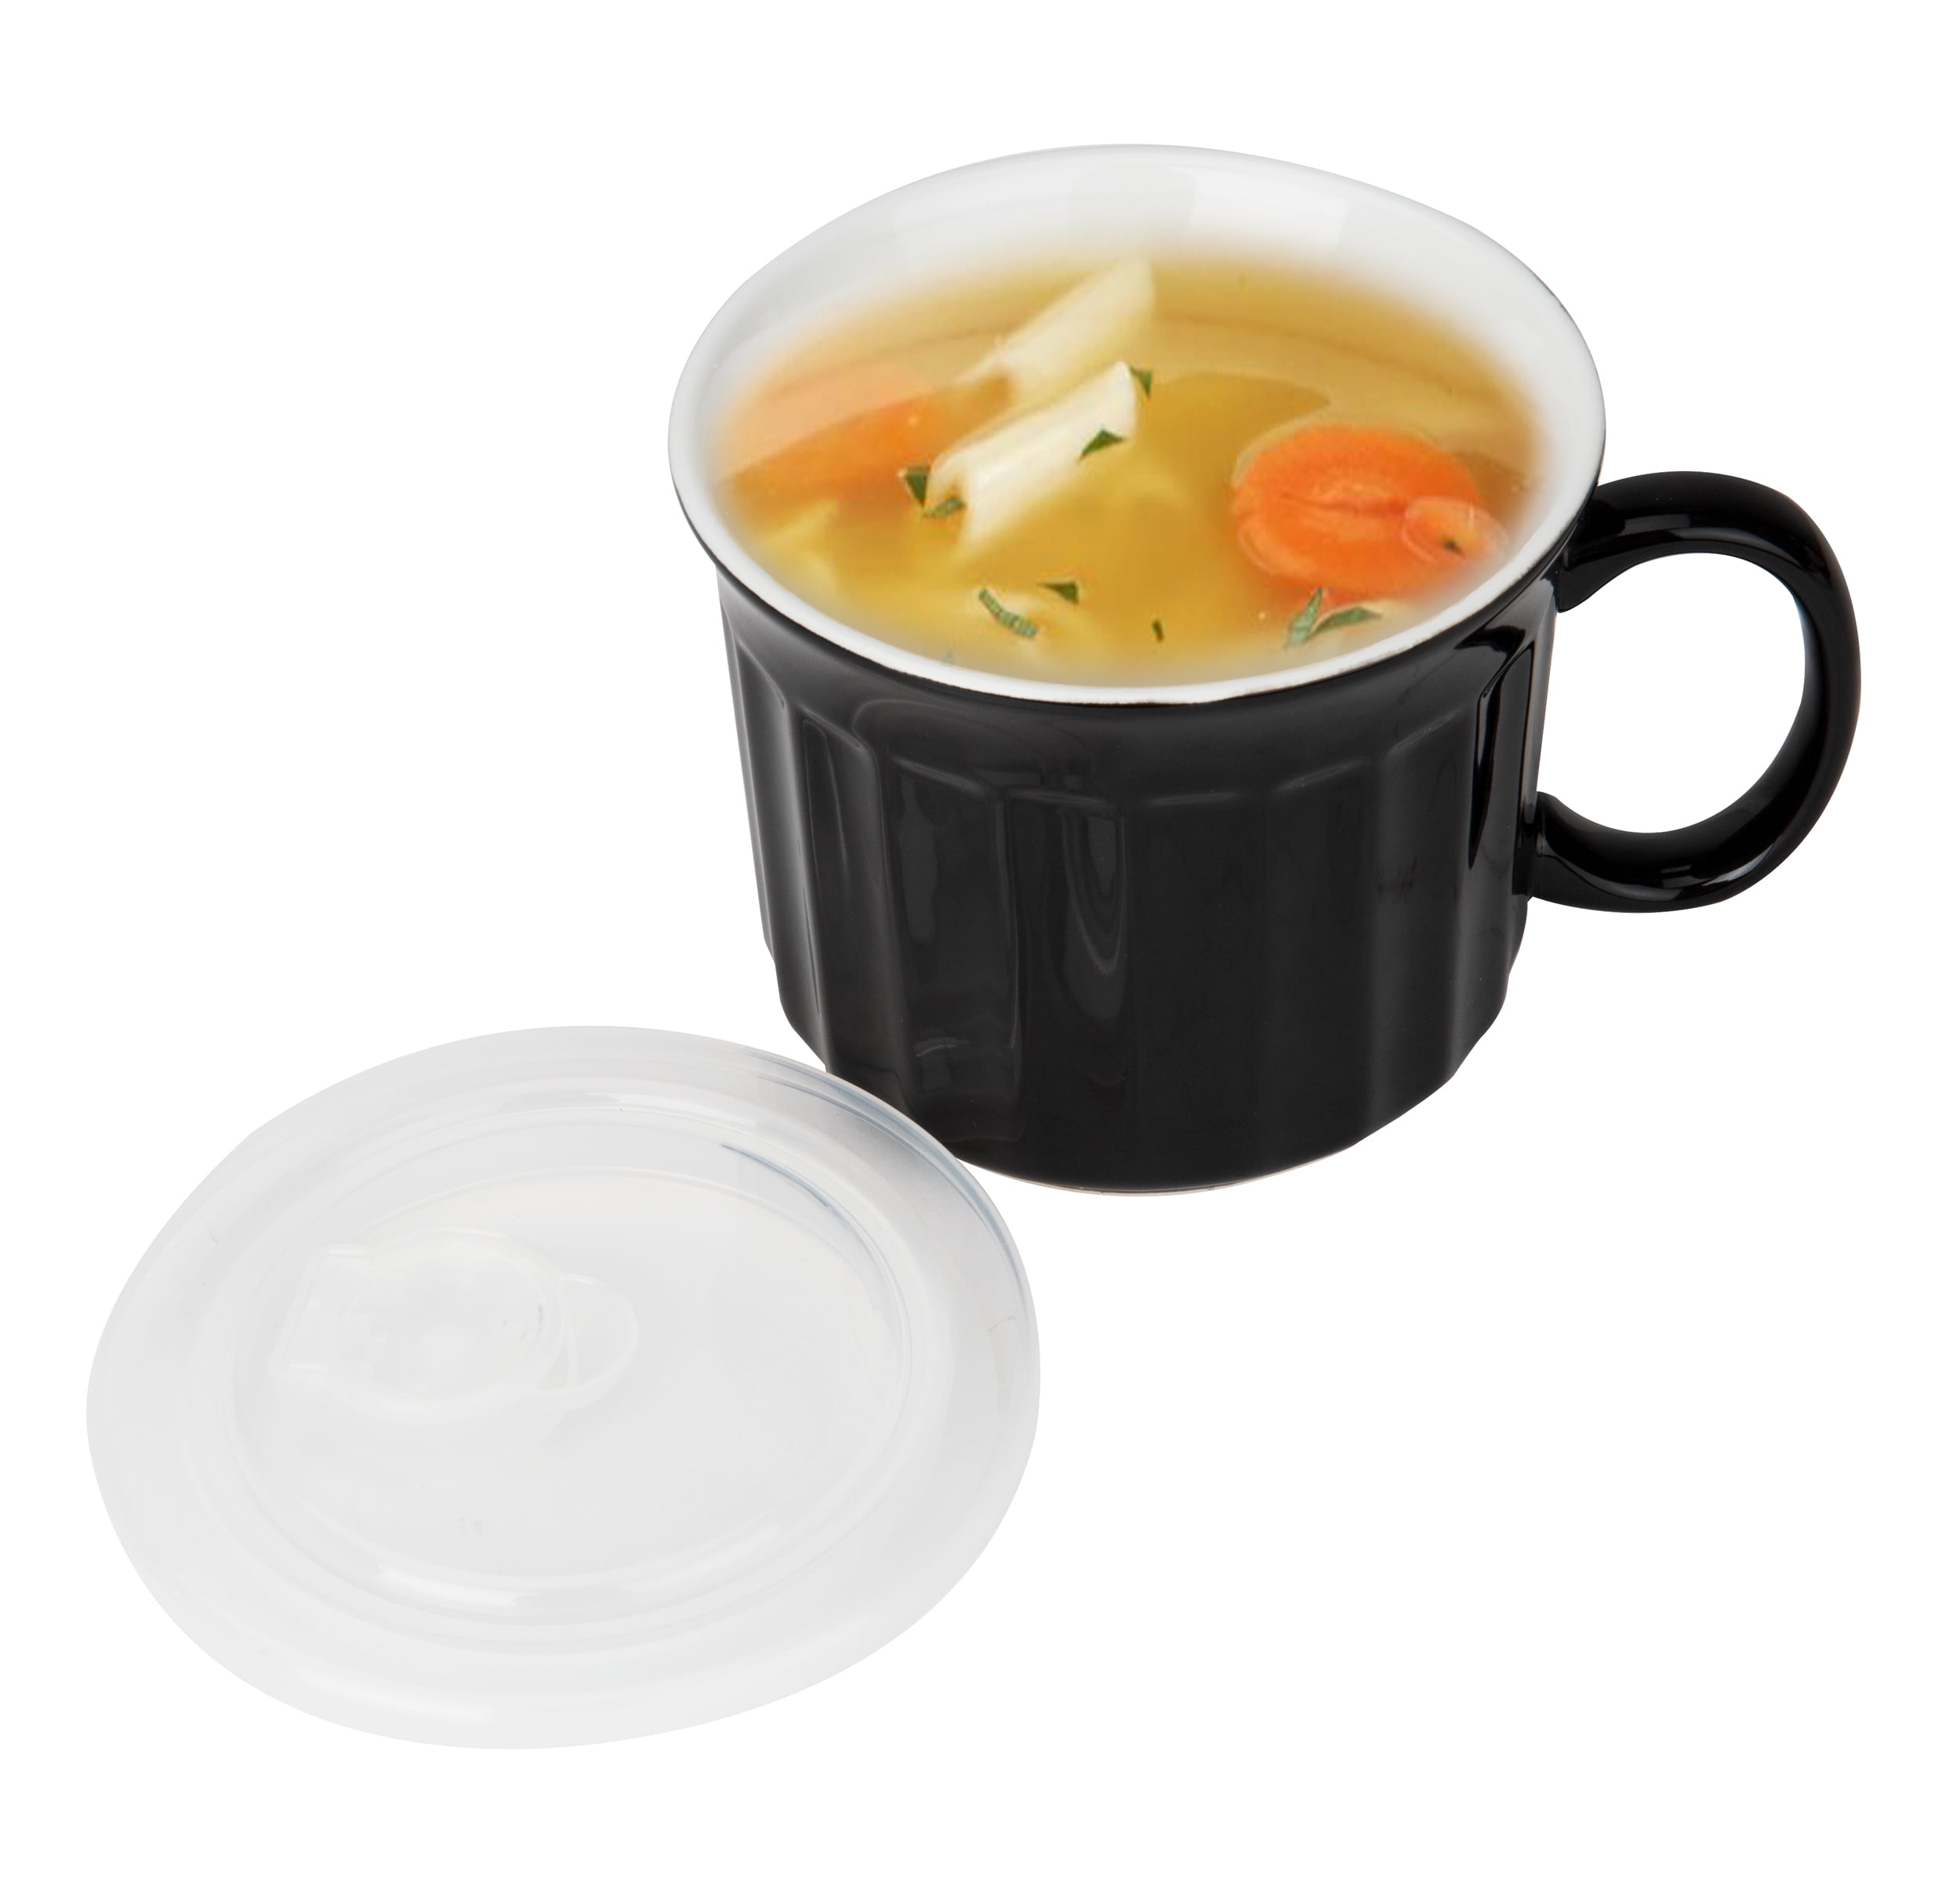 Home-X Microwave Soup Mugs with Lid- Set of 4, Microwave Soup Bowls with  Handle and Vented Lid, BPA Free Dishwasher Safe, 34oz Capacity, Set of 4, 7